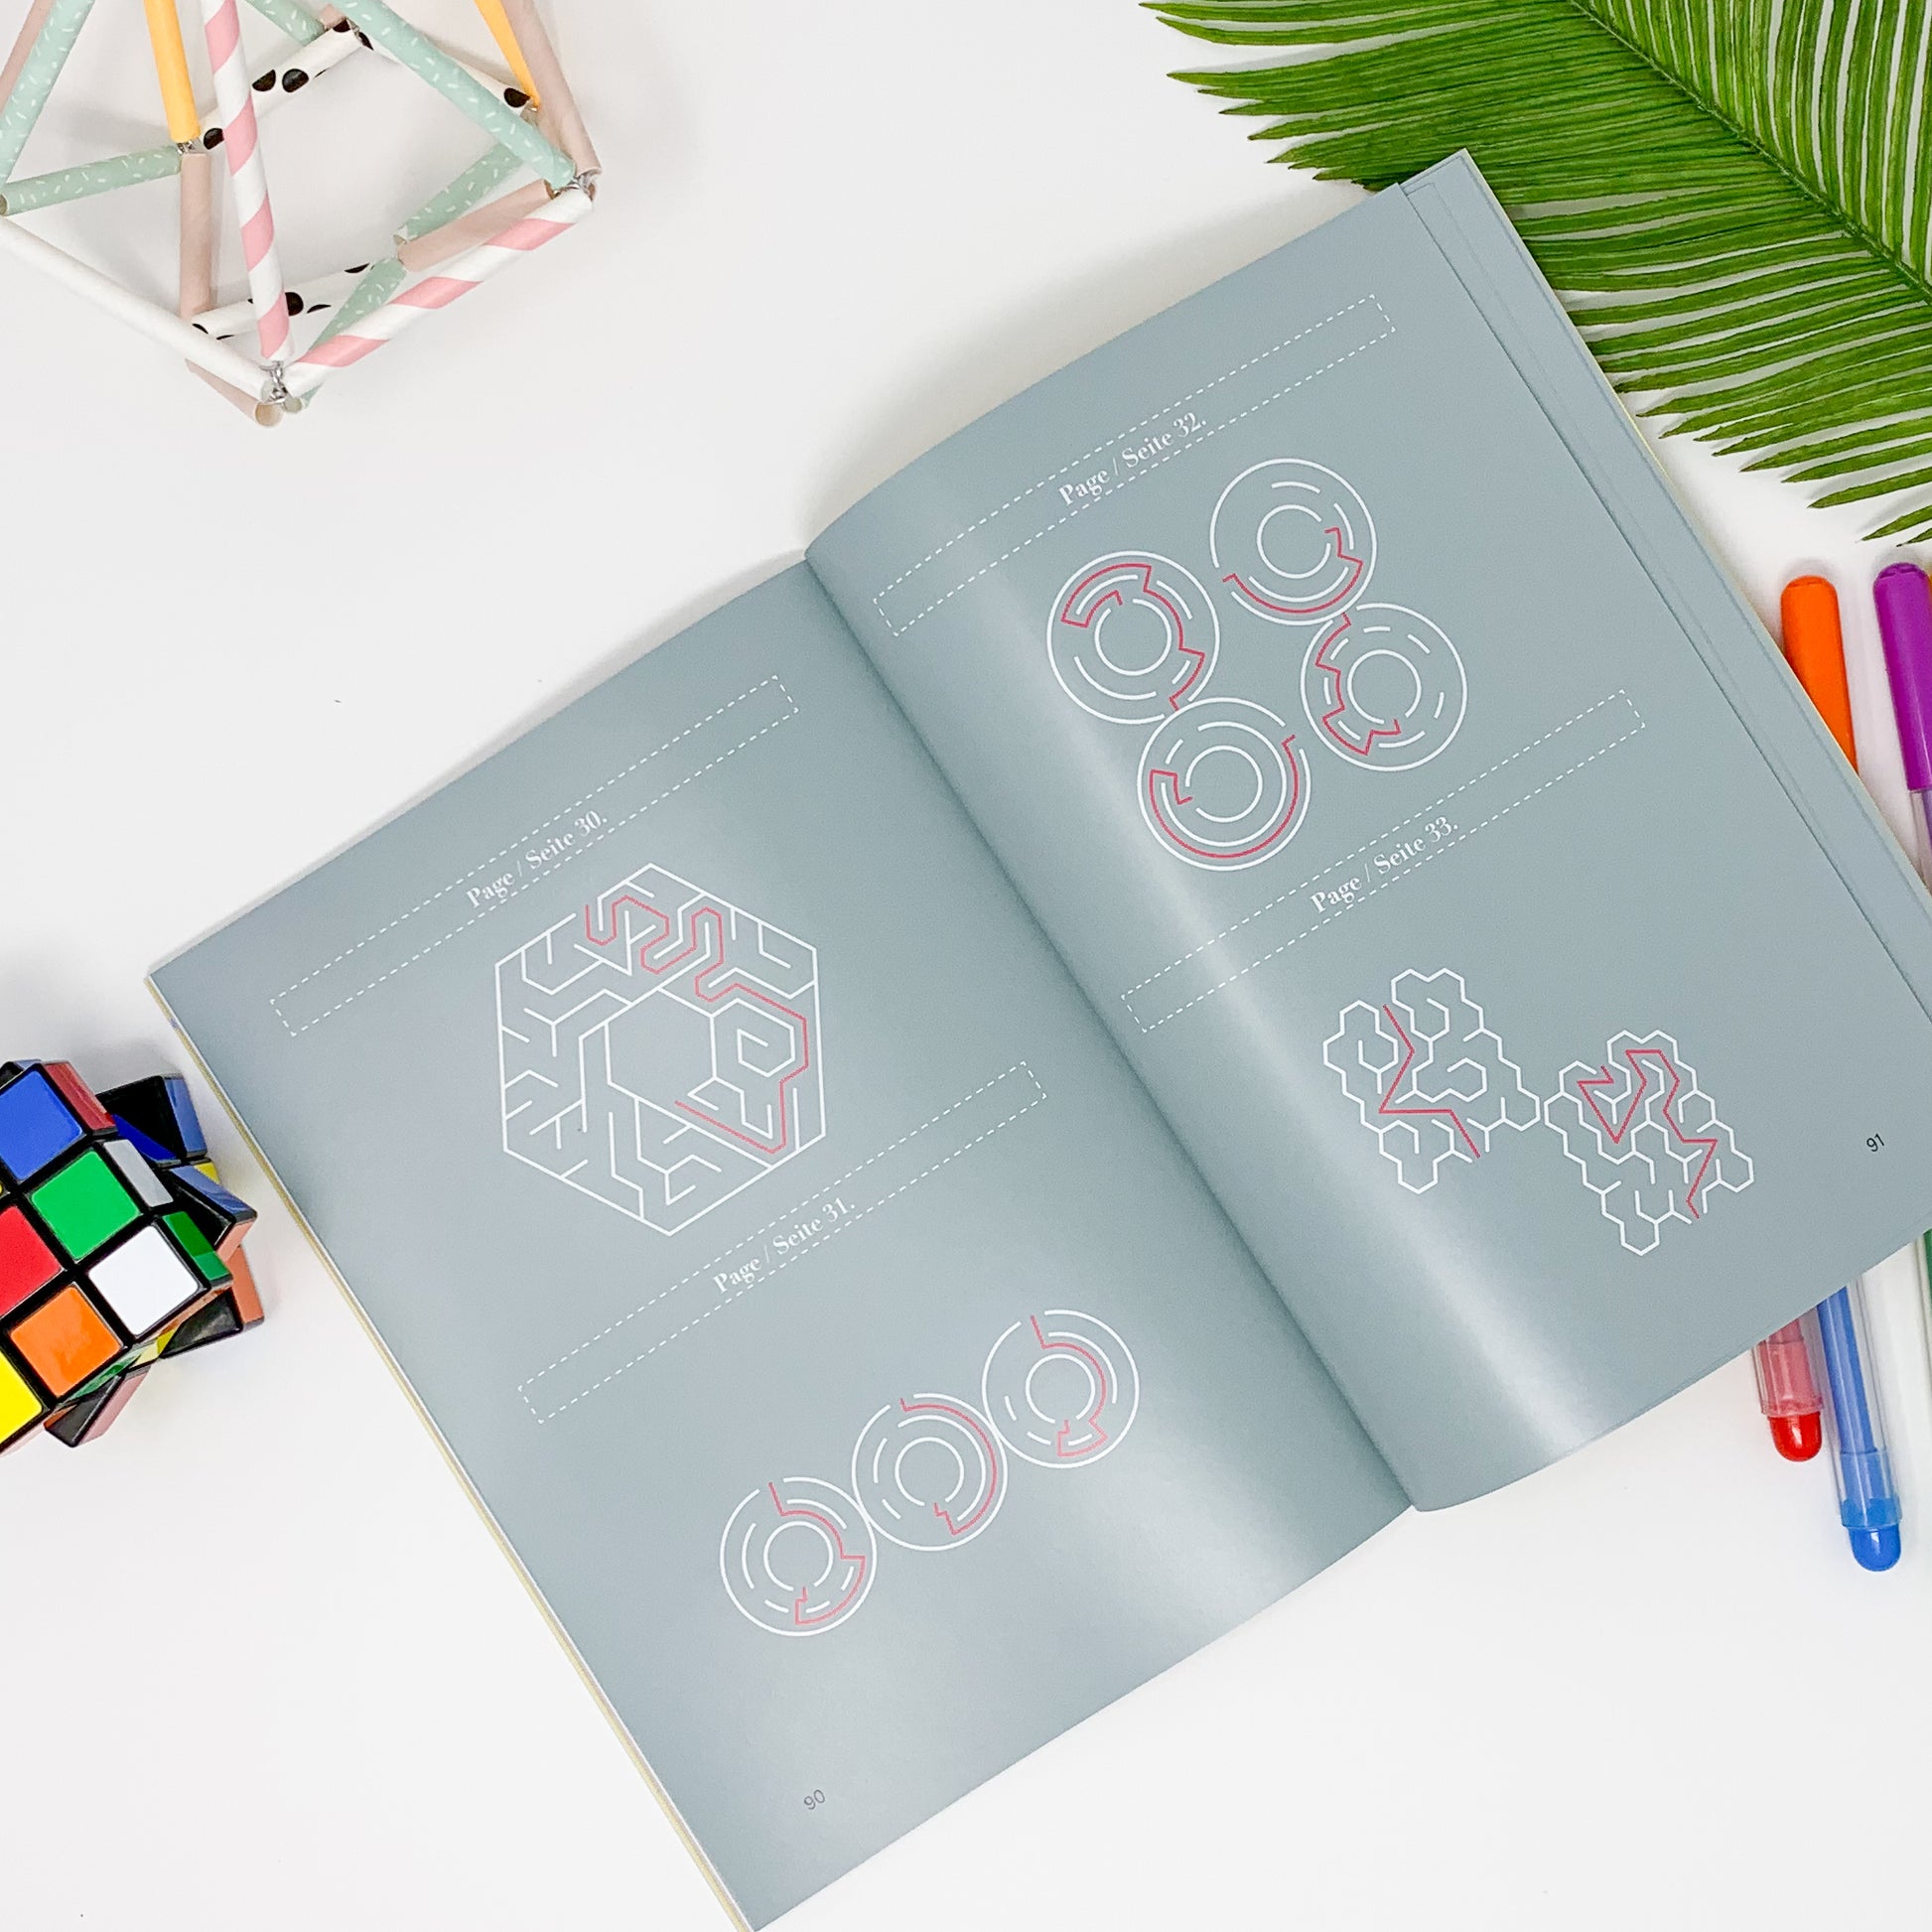 This colourful book offers a variety of multi-coloured entertainment while concentrating on focused attention and complex, planned solution-based thinking.